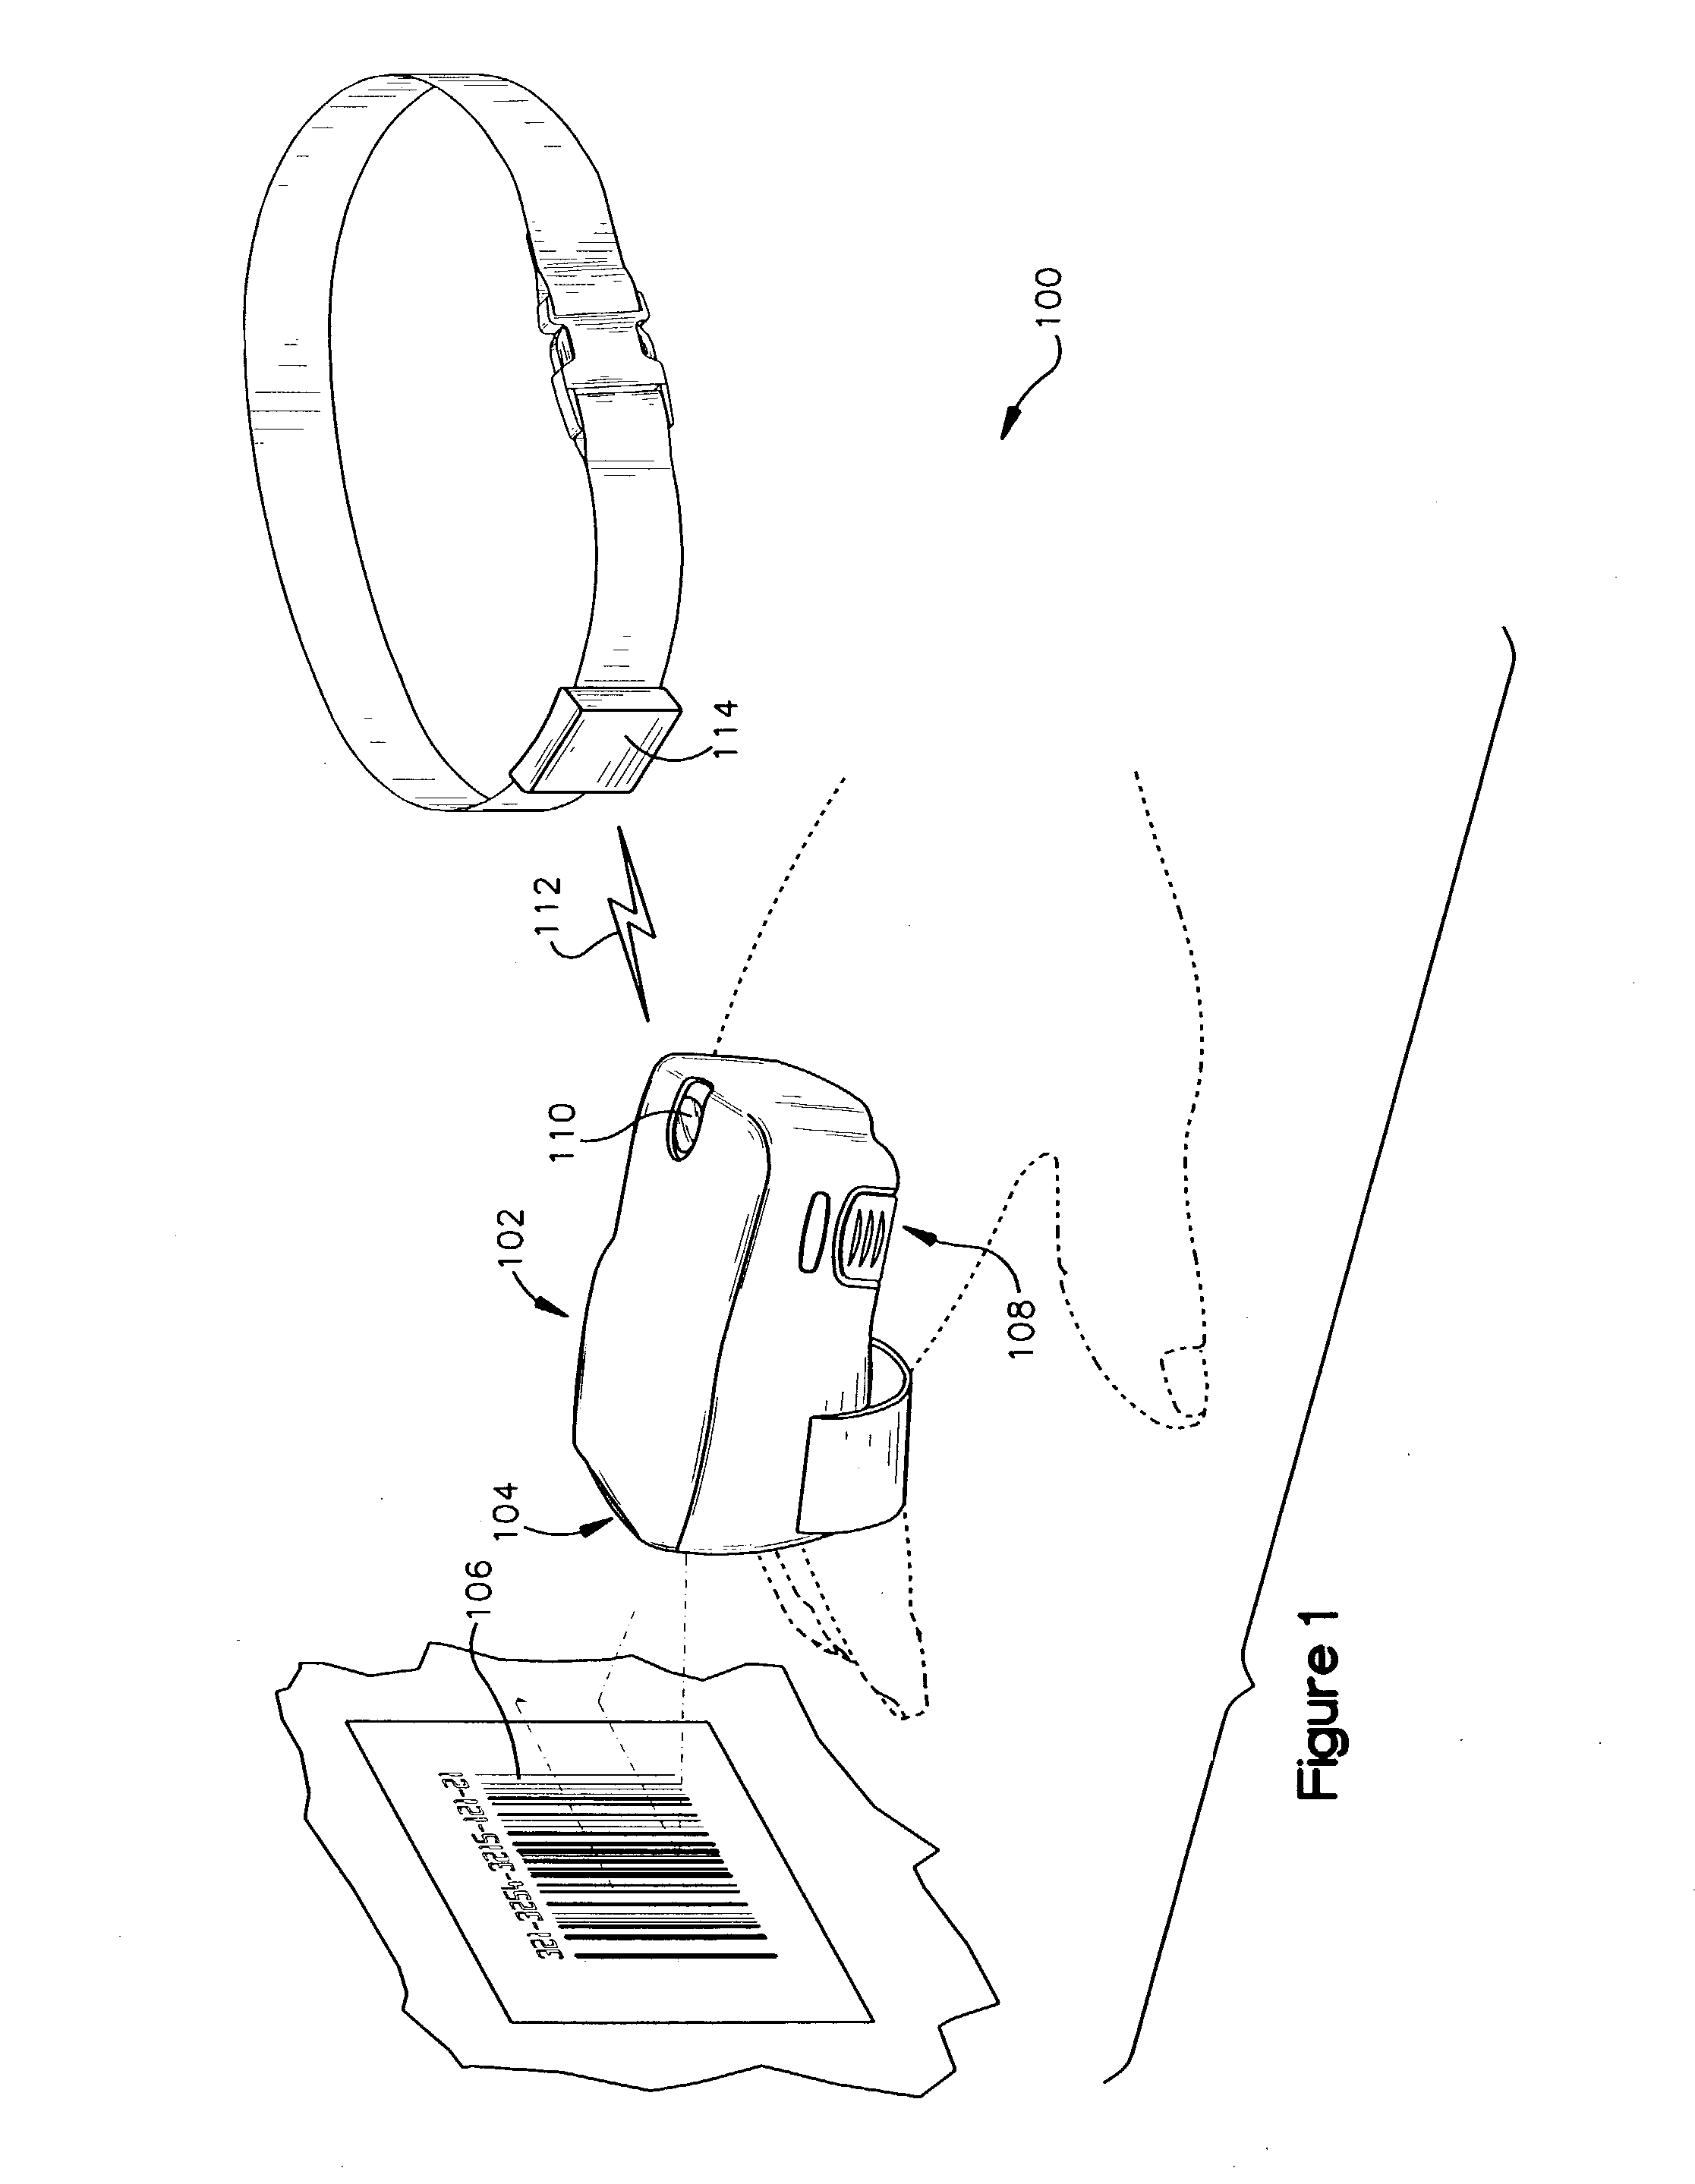 Battery pack with integrated human interface devices